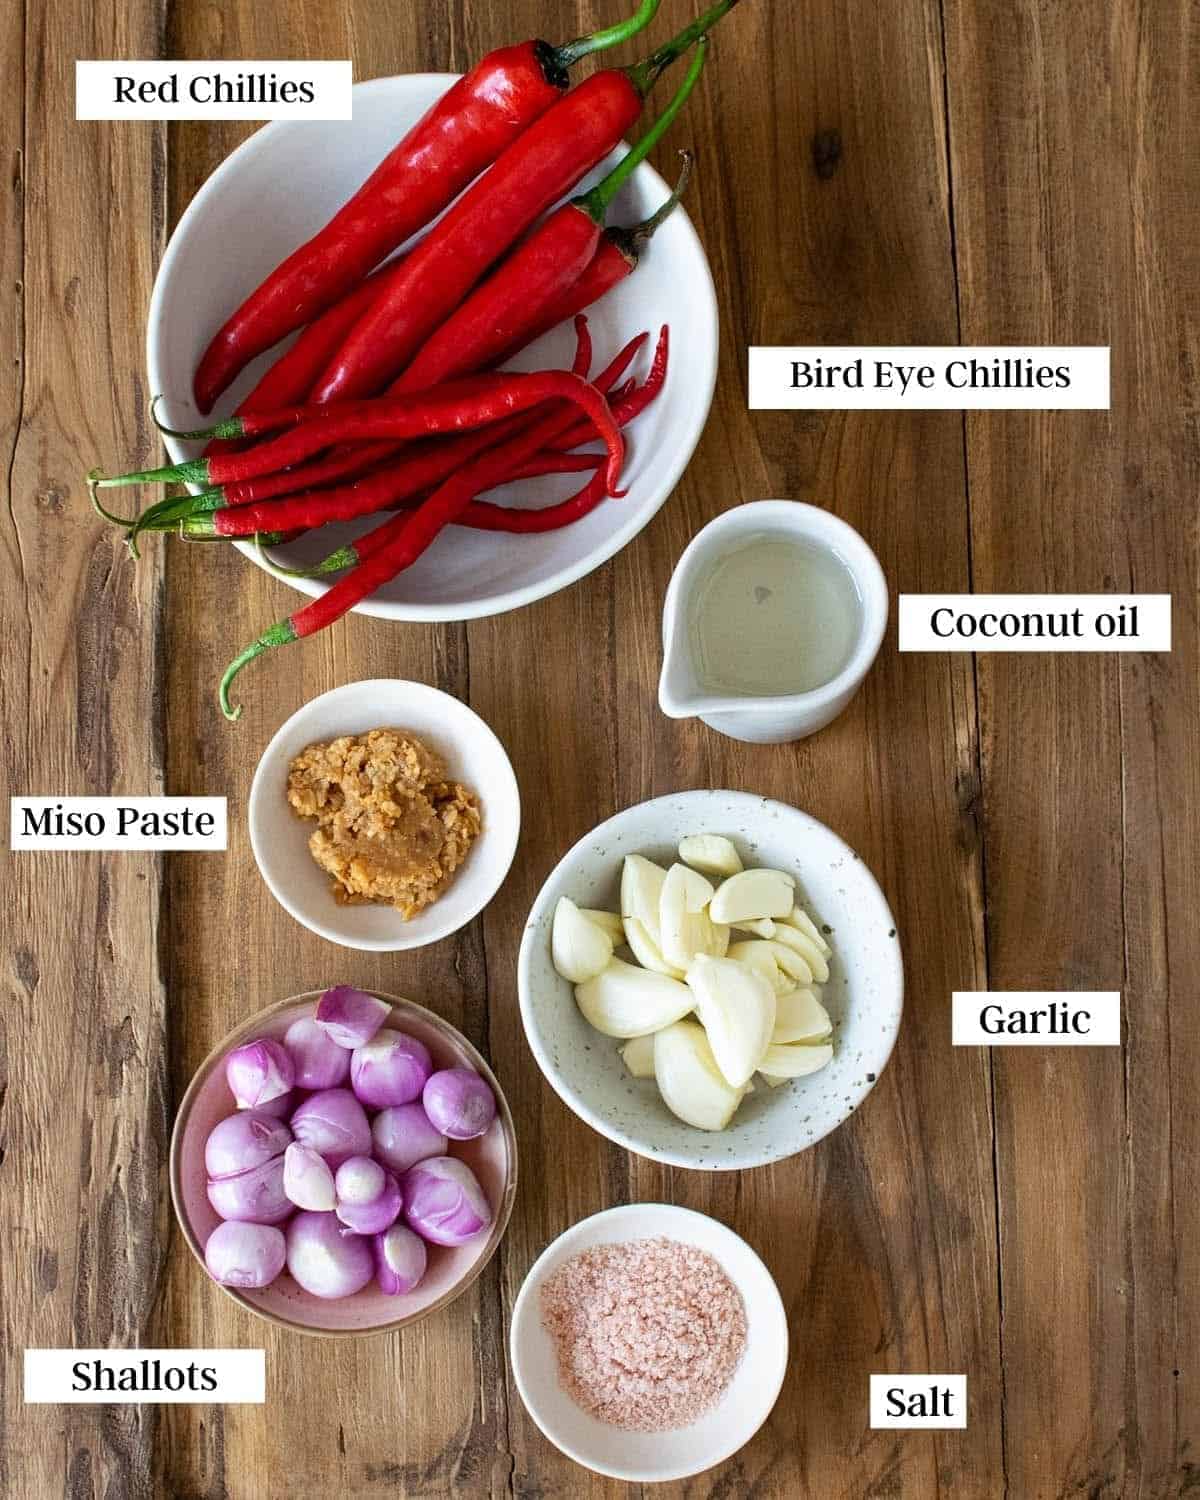 Top down view of all ingredients for sambal goreng, with text labelling each item